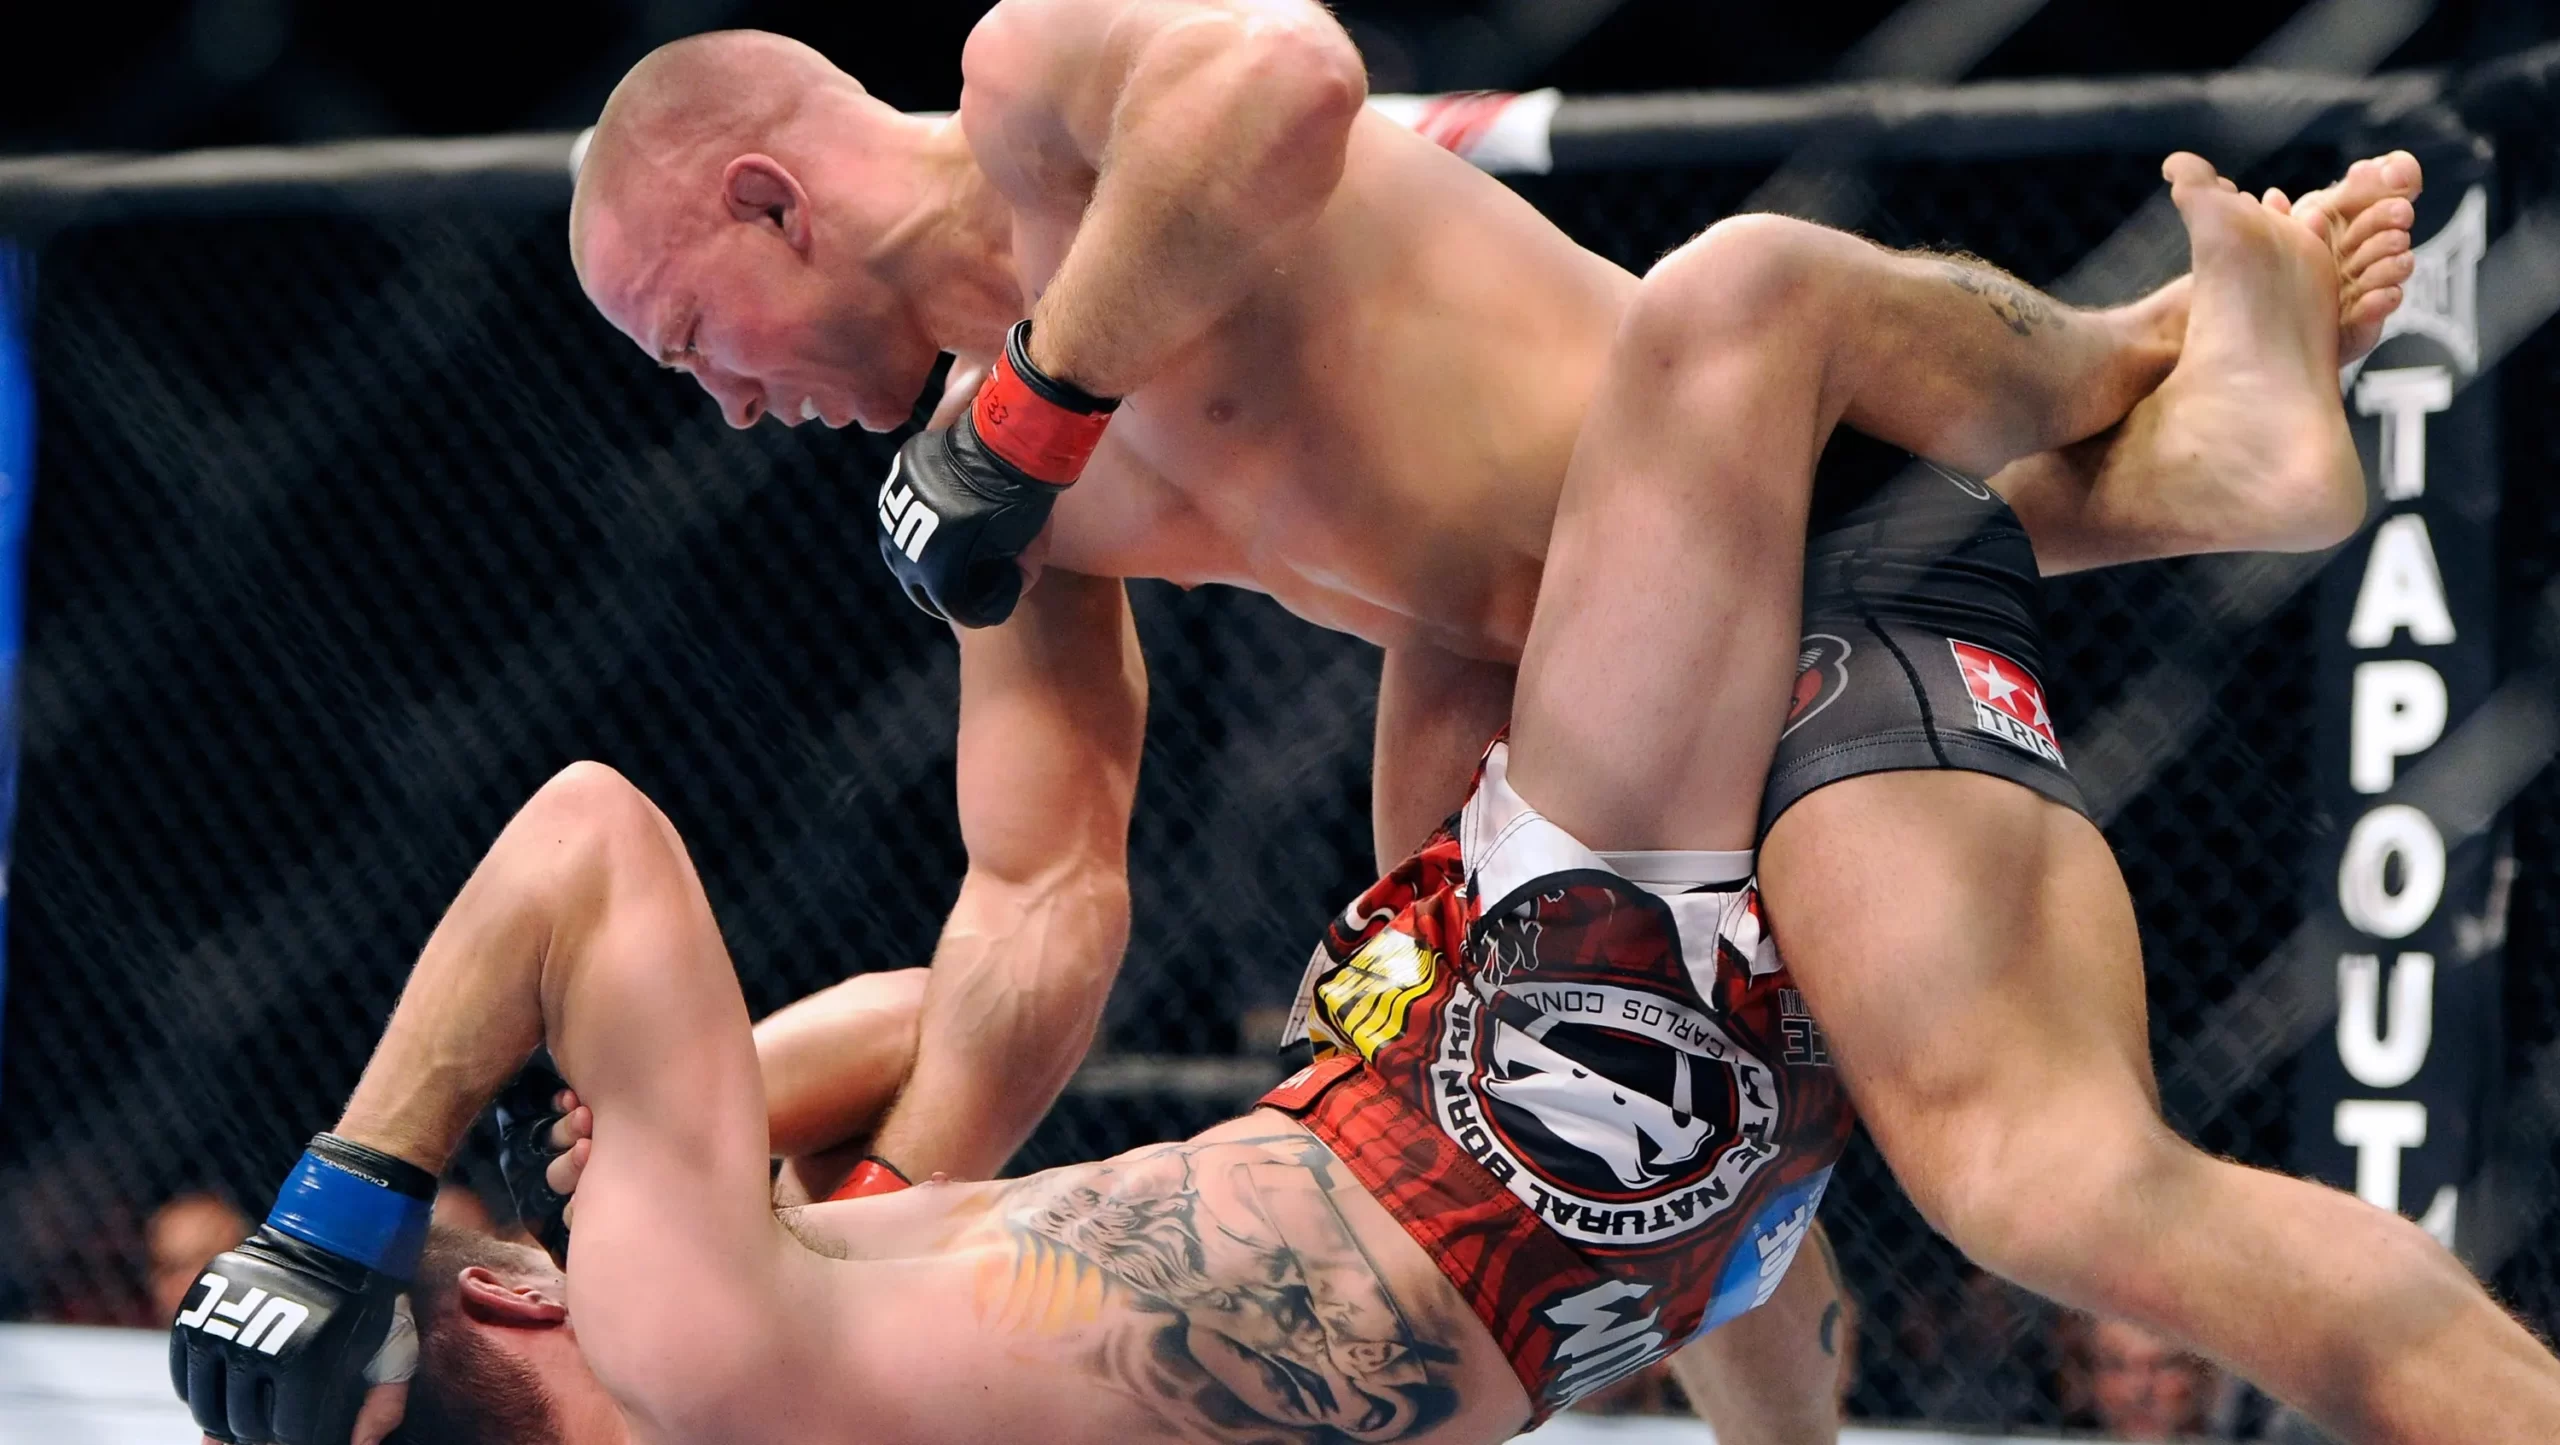 St-Pierre During A Welterweight Fight